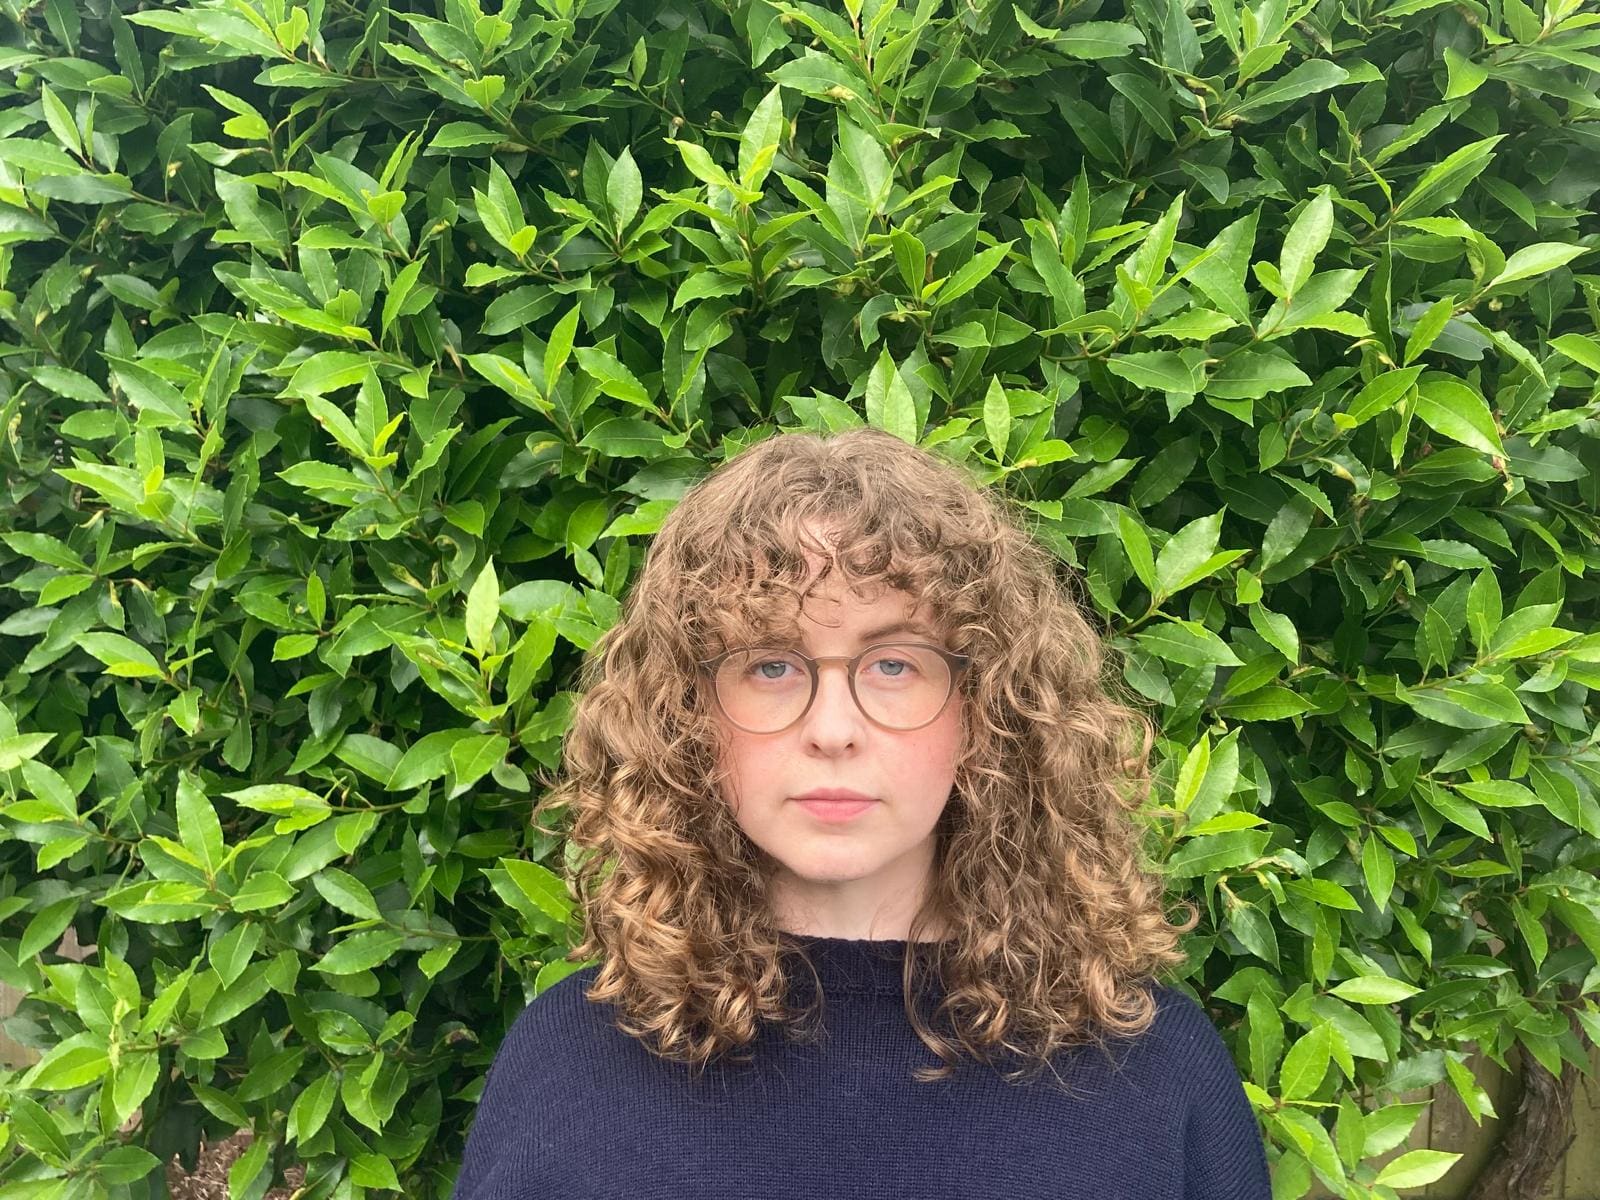 A white woman in glasses with curly blond hair wearing a dark blue top standing in front of leaves.